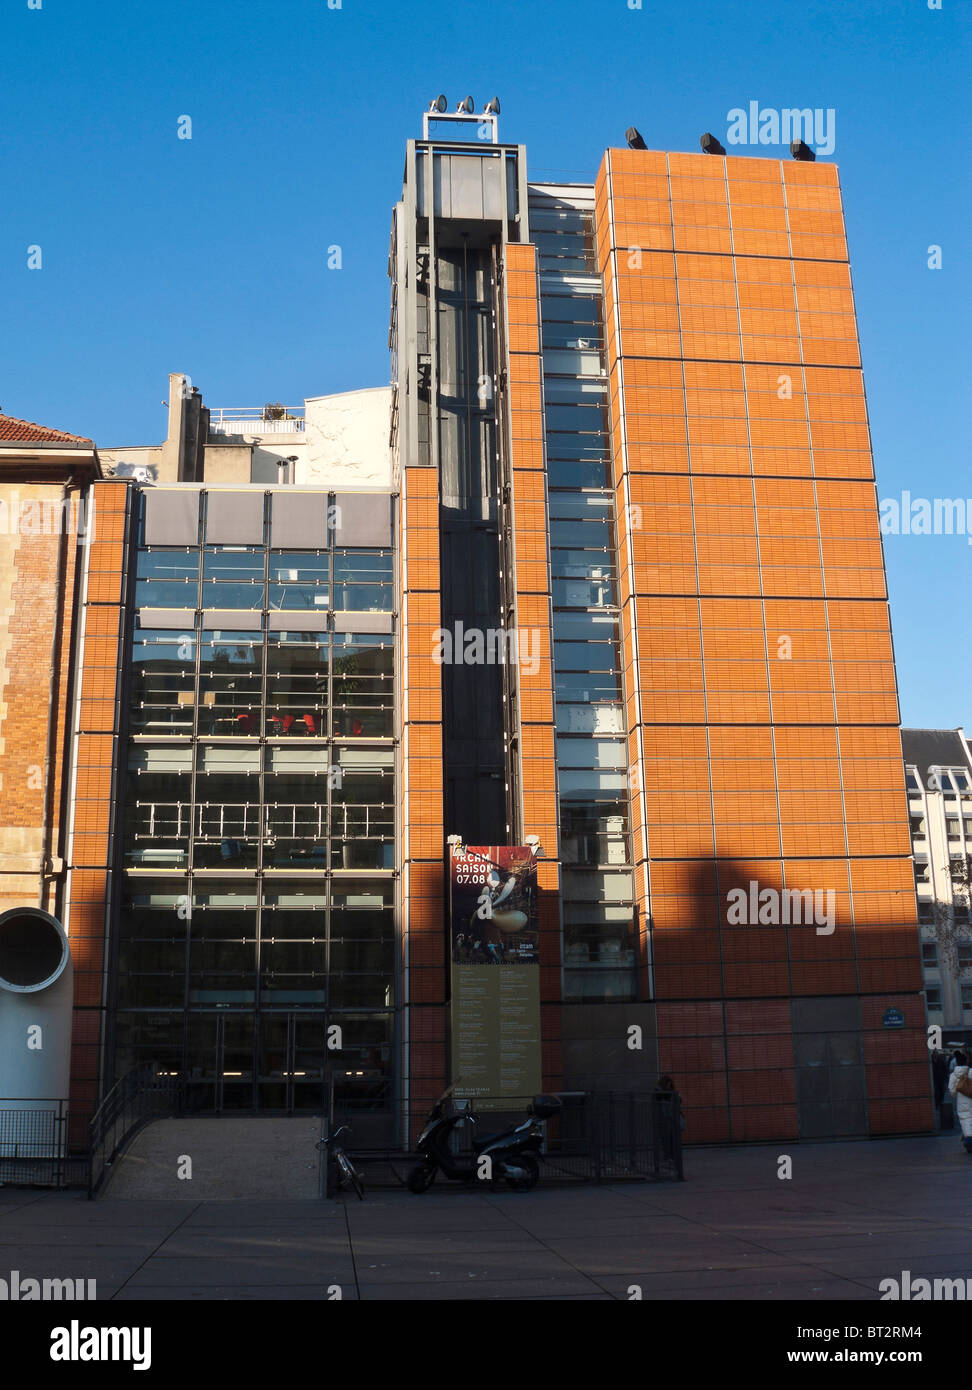 IRCAM building designed by the architect Renzo Piano & Richard rogers in 1977 Stock Photo